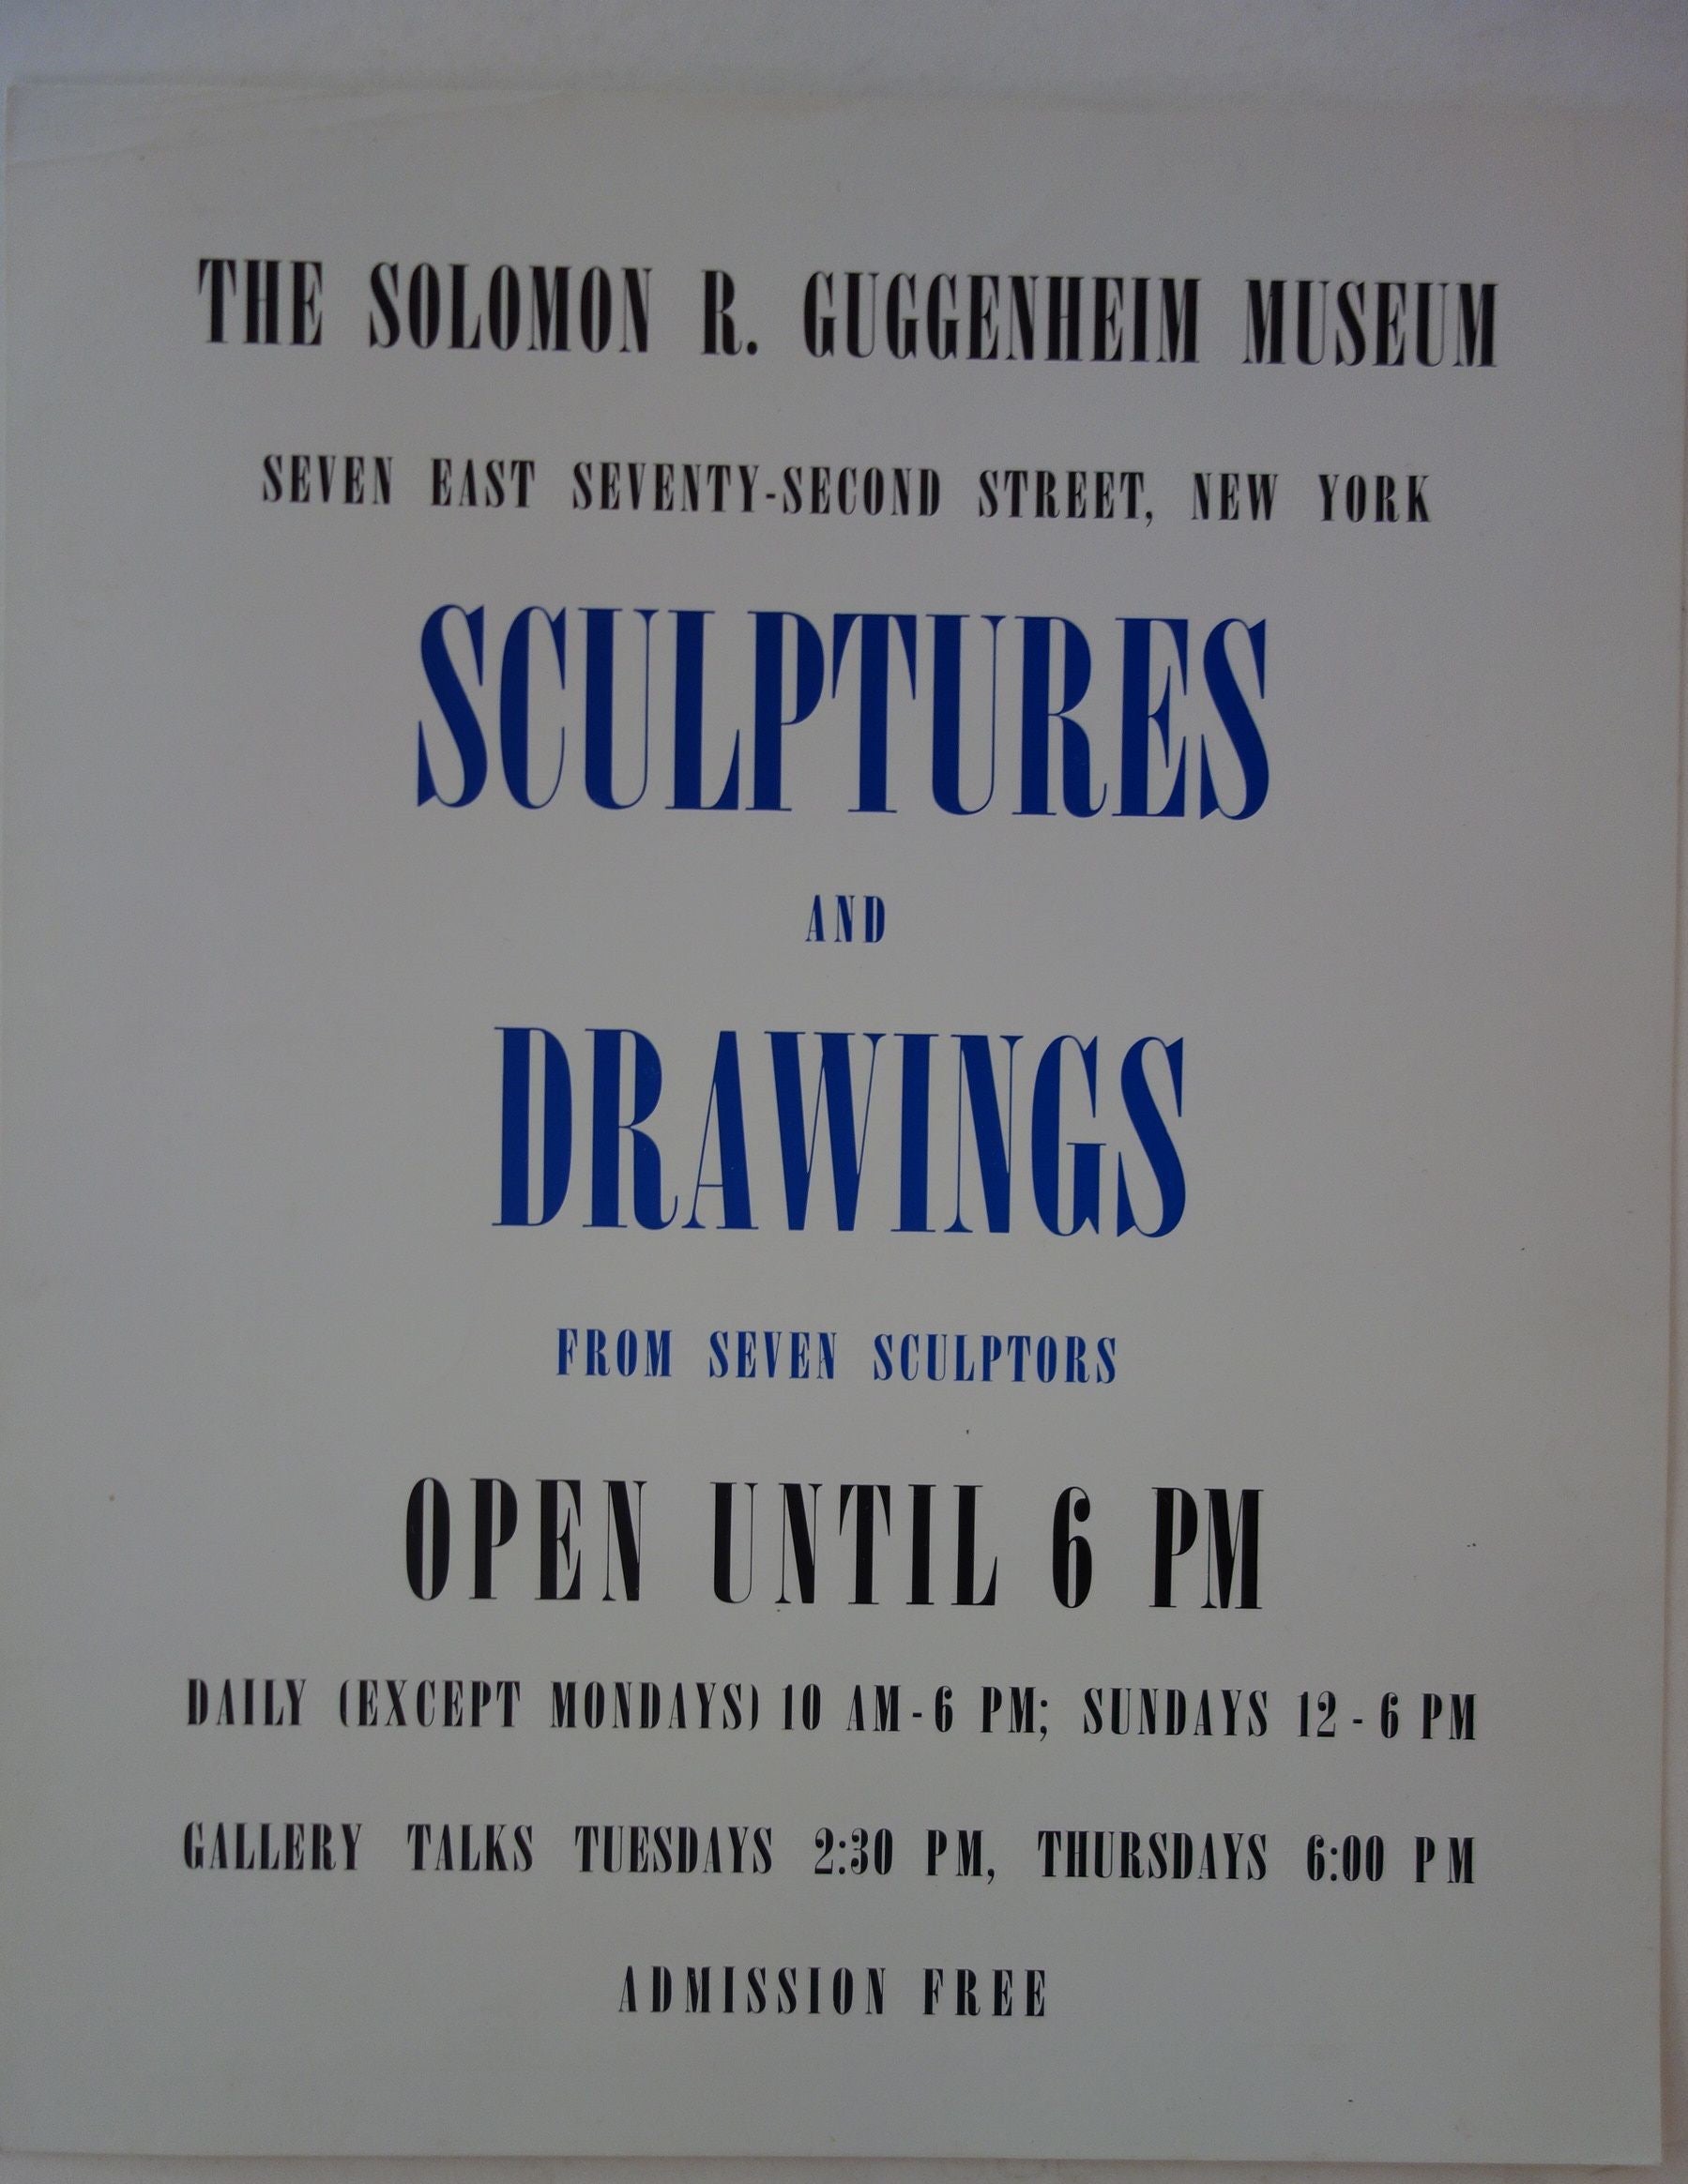 Sculptures and Drawings from Seven Sculptors